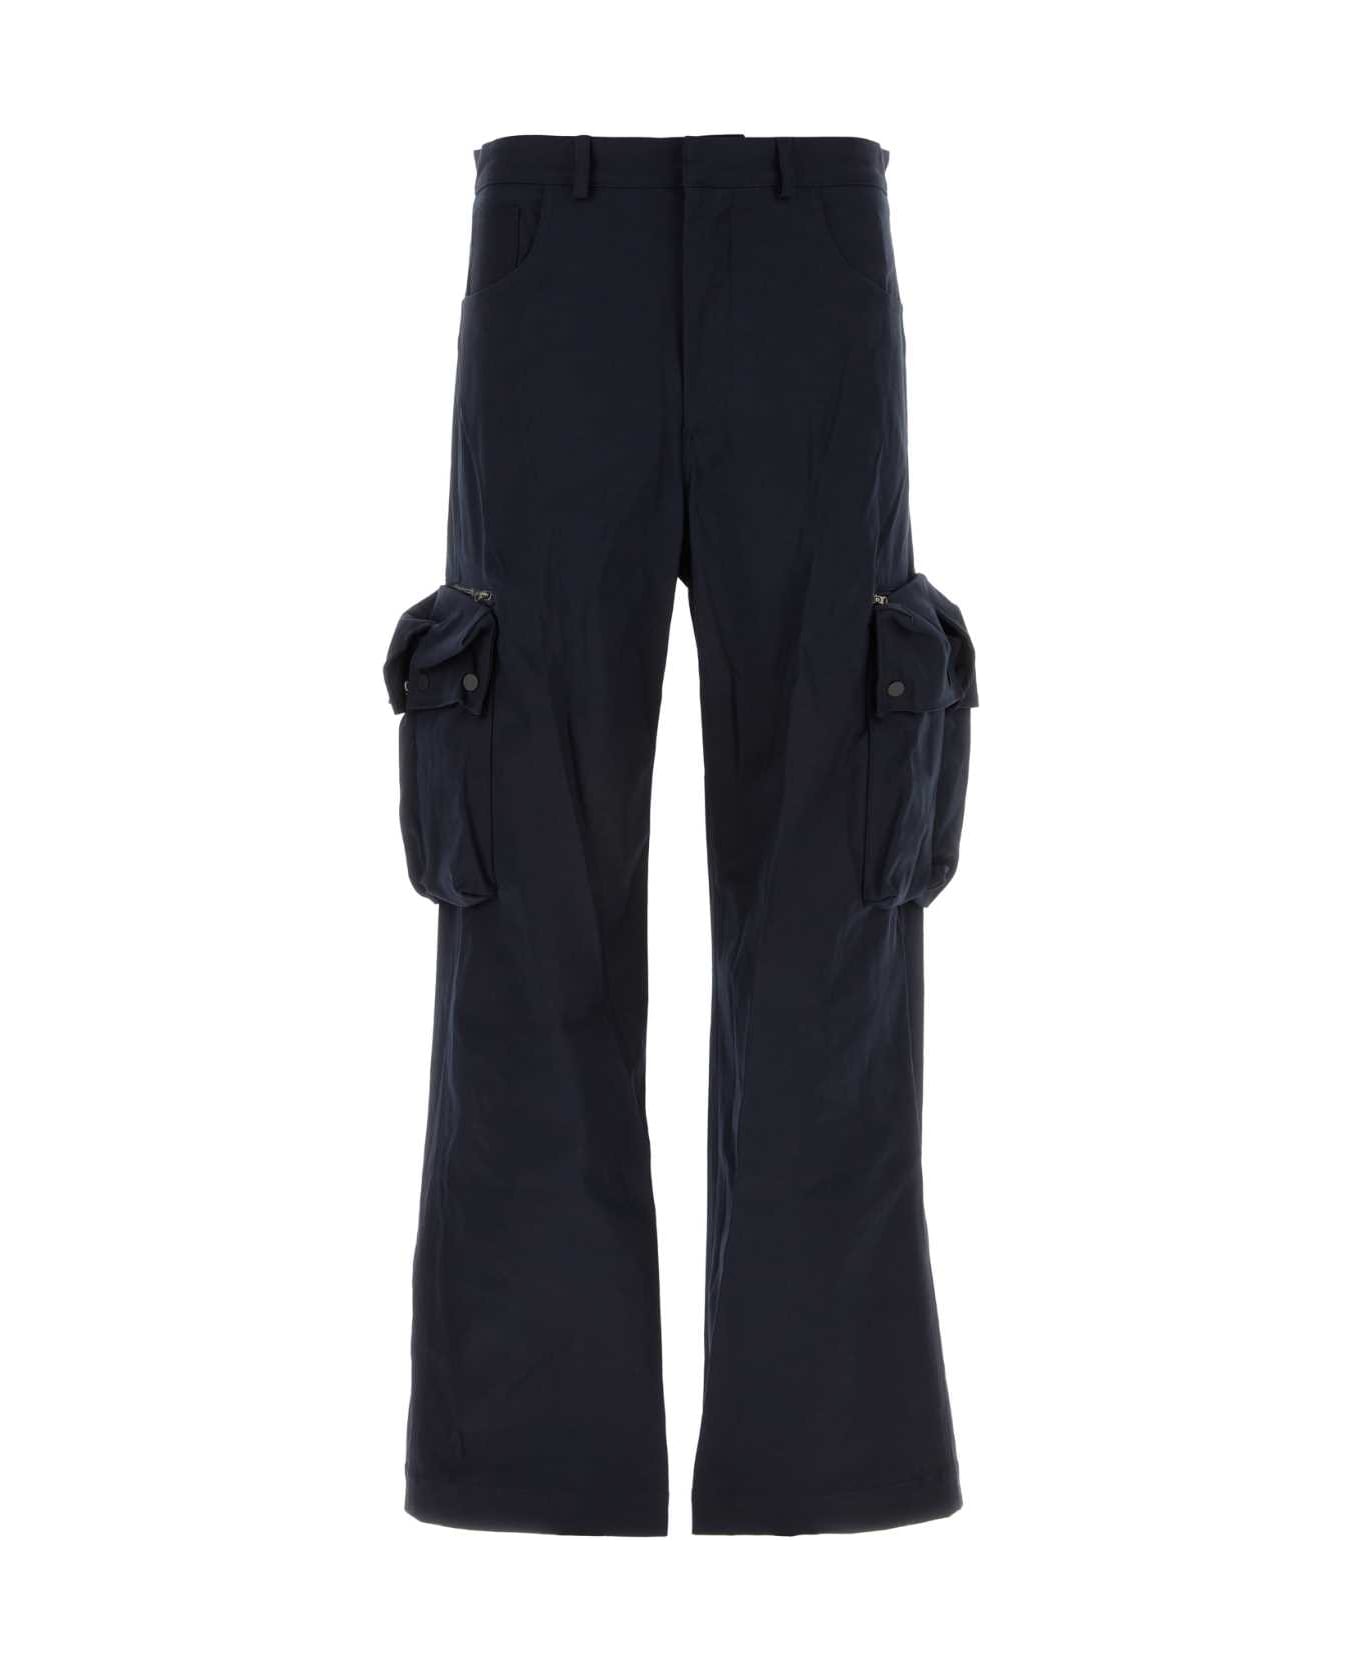 Botter Midnight Blue Stretch Cotton Cargo Pant - COTTON STRETCH NAVY ボトムス